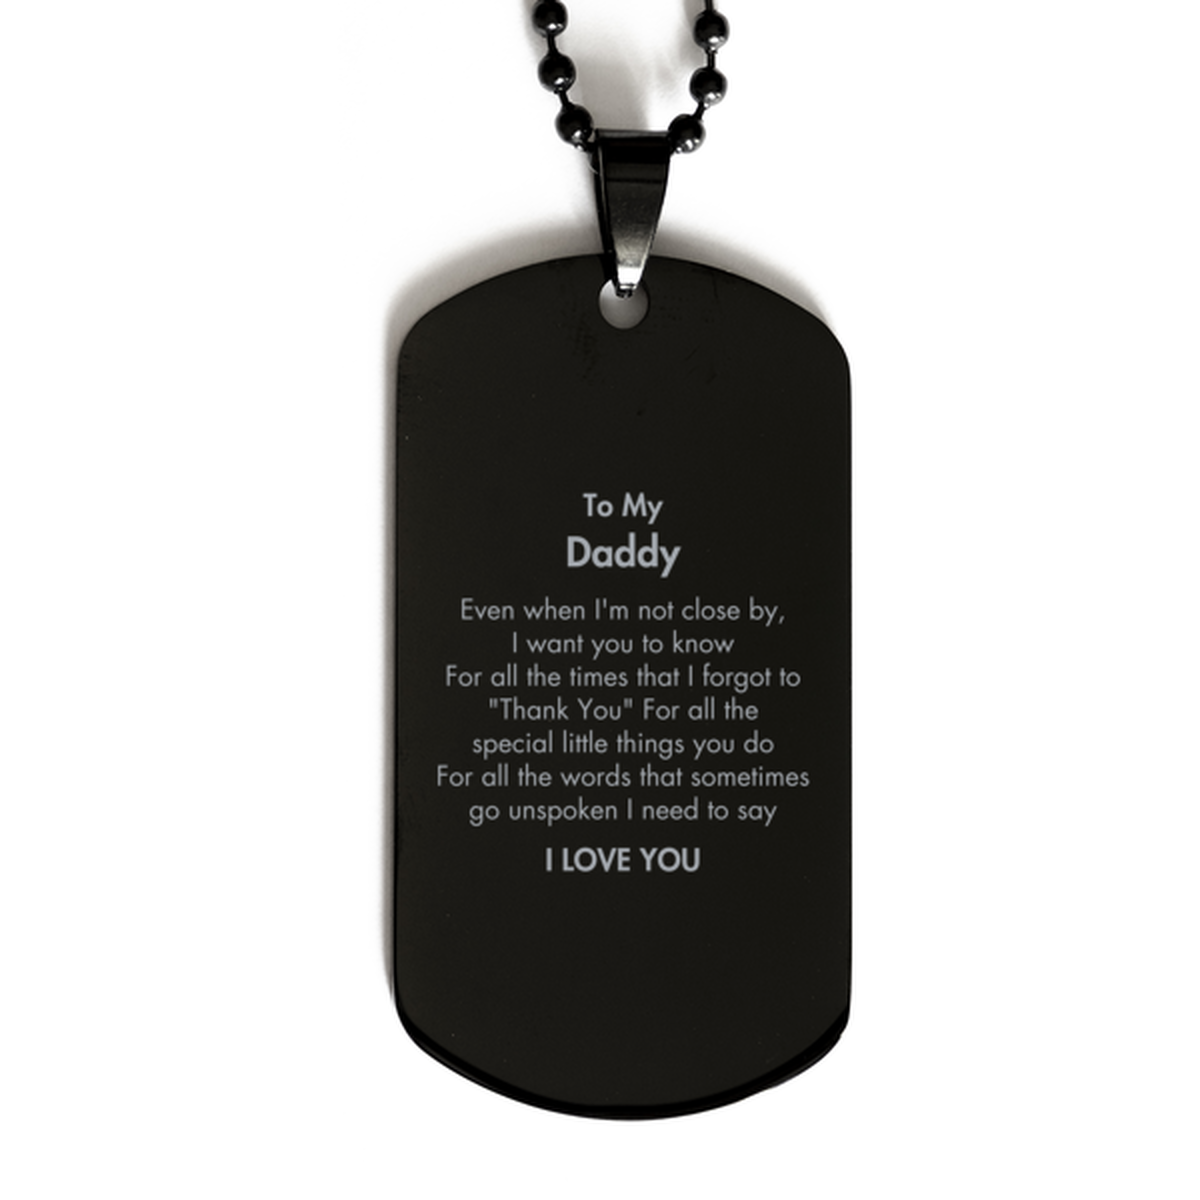 Thank You Gifts for Daddy, Keepsake Black Dog Tag Gifts for Daddy Birthday Mother's day Father's Day Daddy For all the words That sometimes go unspoken I need to say I LOVE YOU